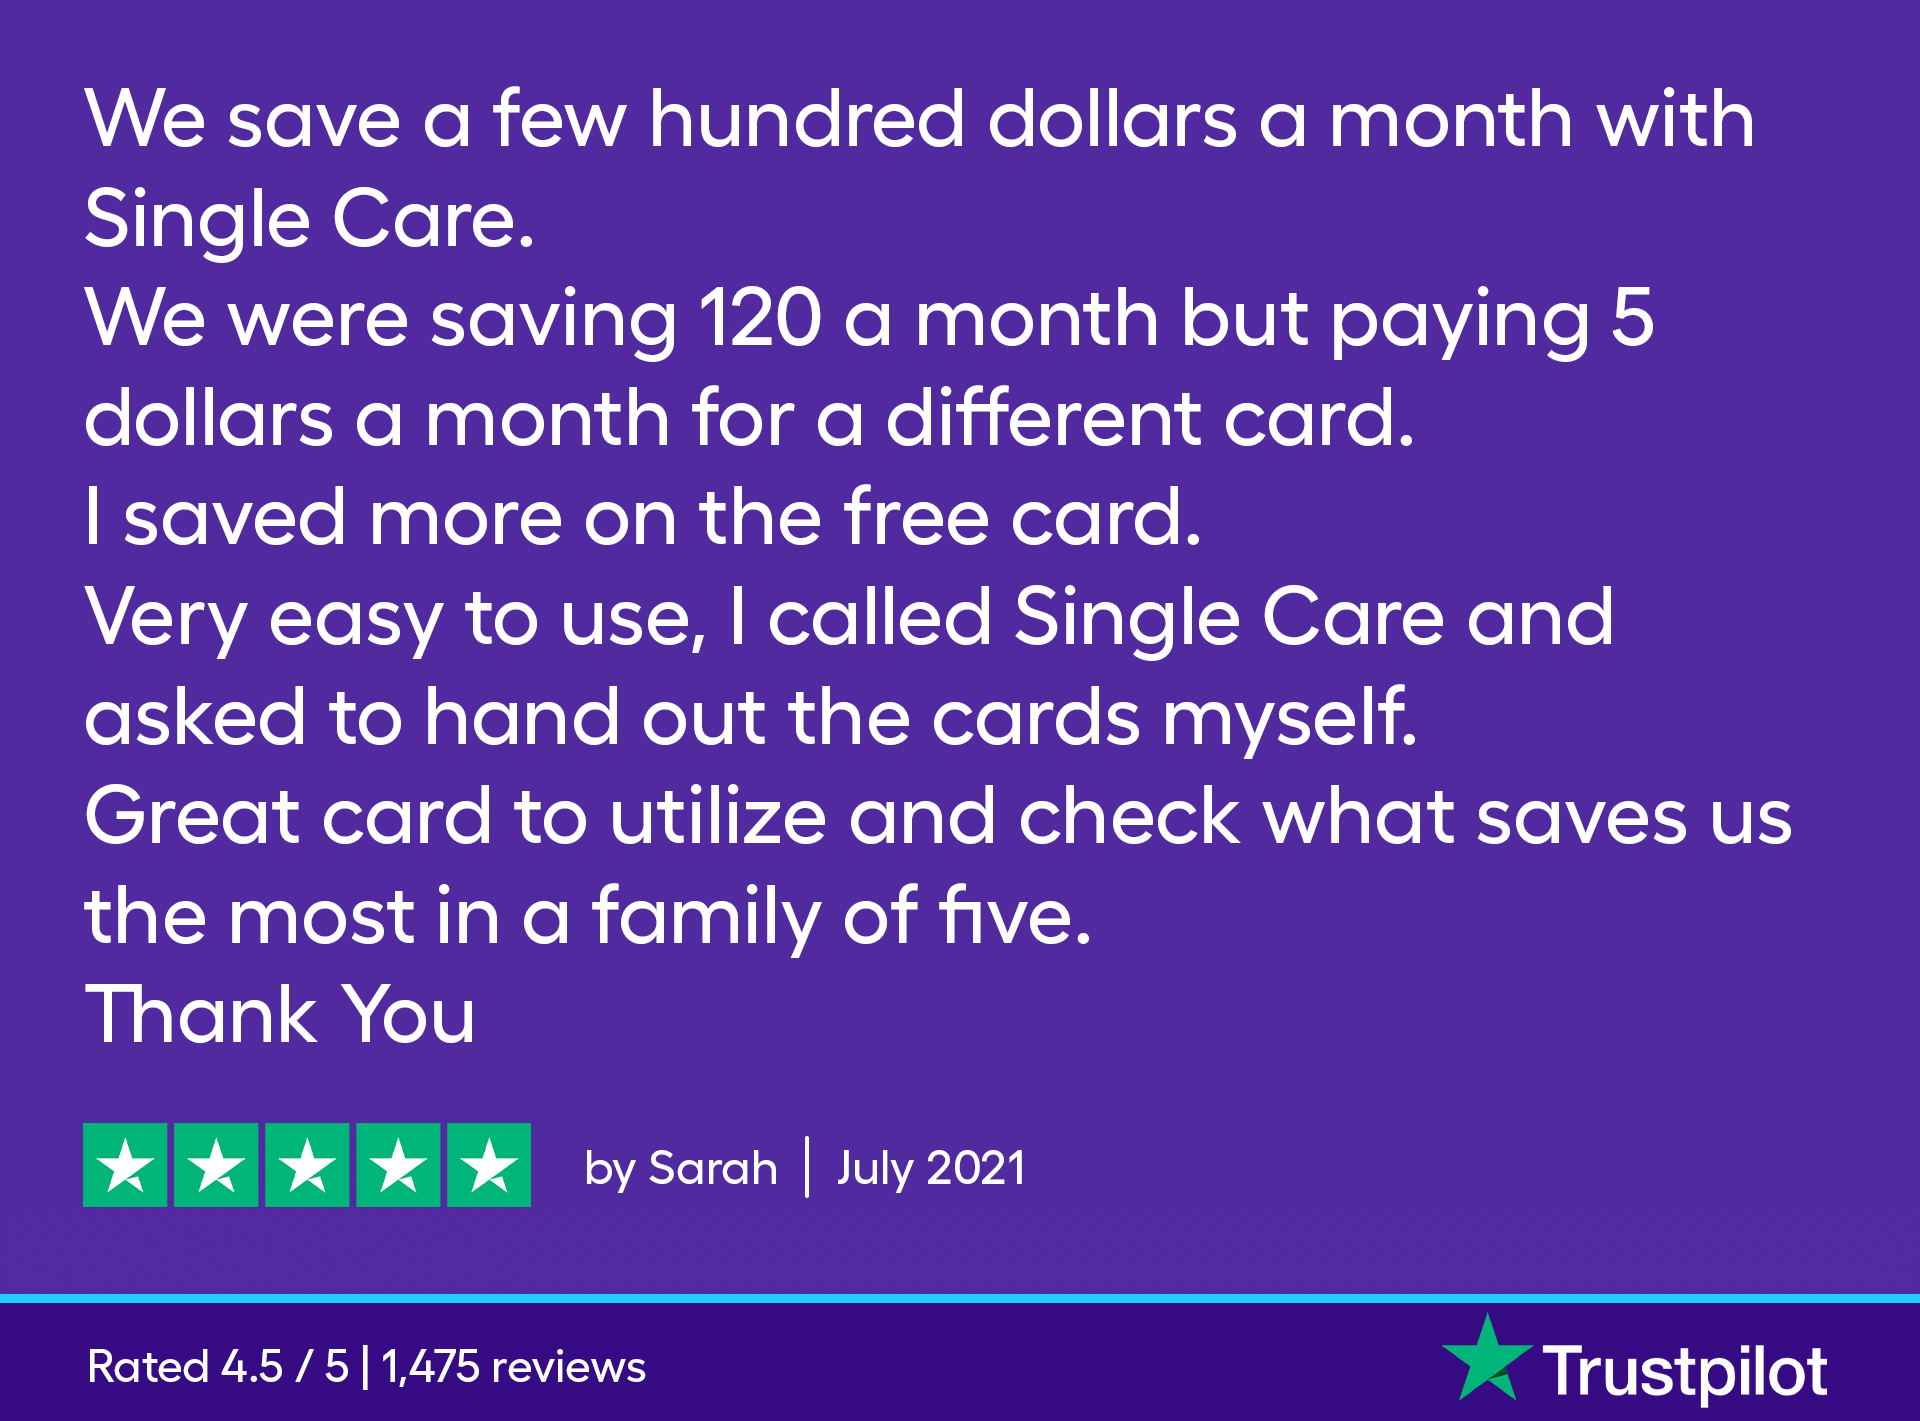 We save a few hundred dollars a month with SingleCare. We were saving $120/month, but paying$5/month for a different card. I save more with this free card. It’s very easy to use. I even called SingleCare and asked to hand out the cards myself. Great card to check which pharmacy saves us the most for a family of five. Thank you!